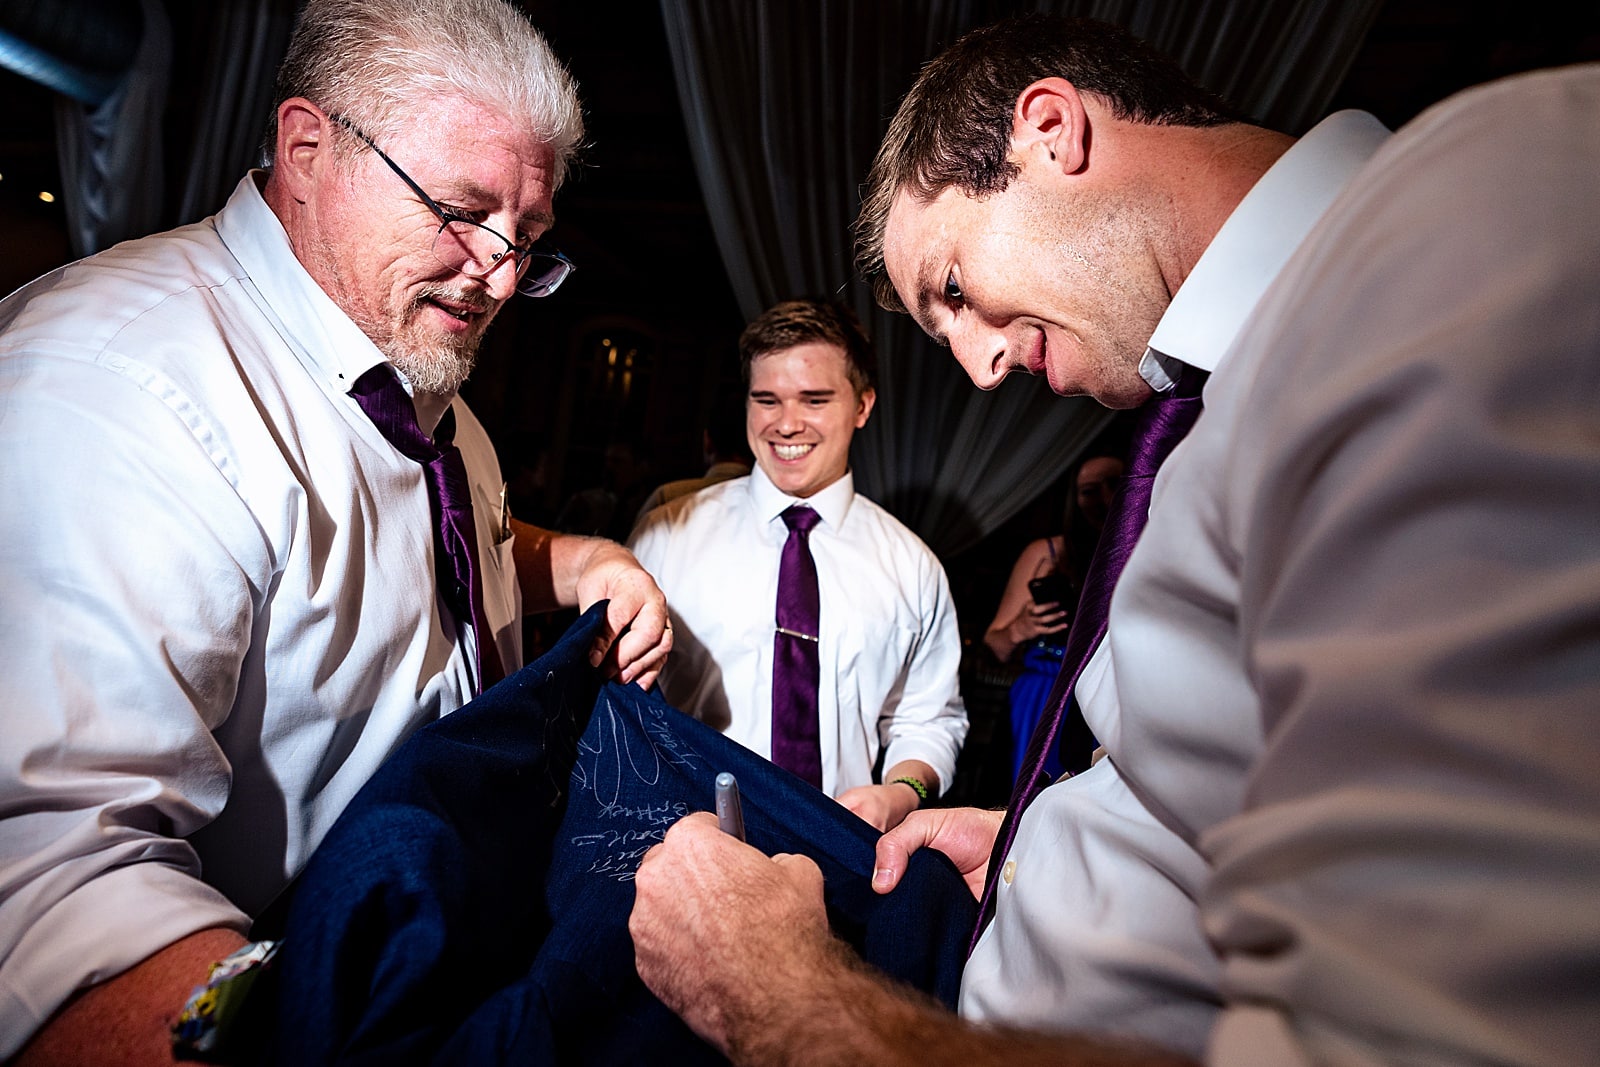 This groom's groomsmen signed his suit jacket as part of a group tradition